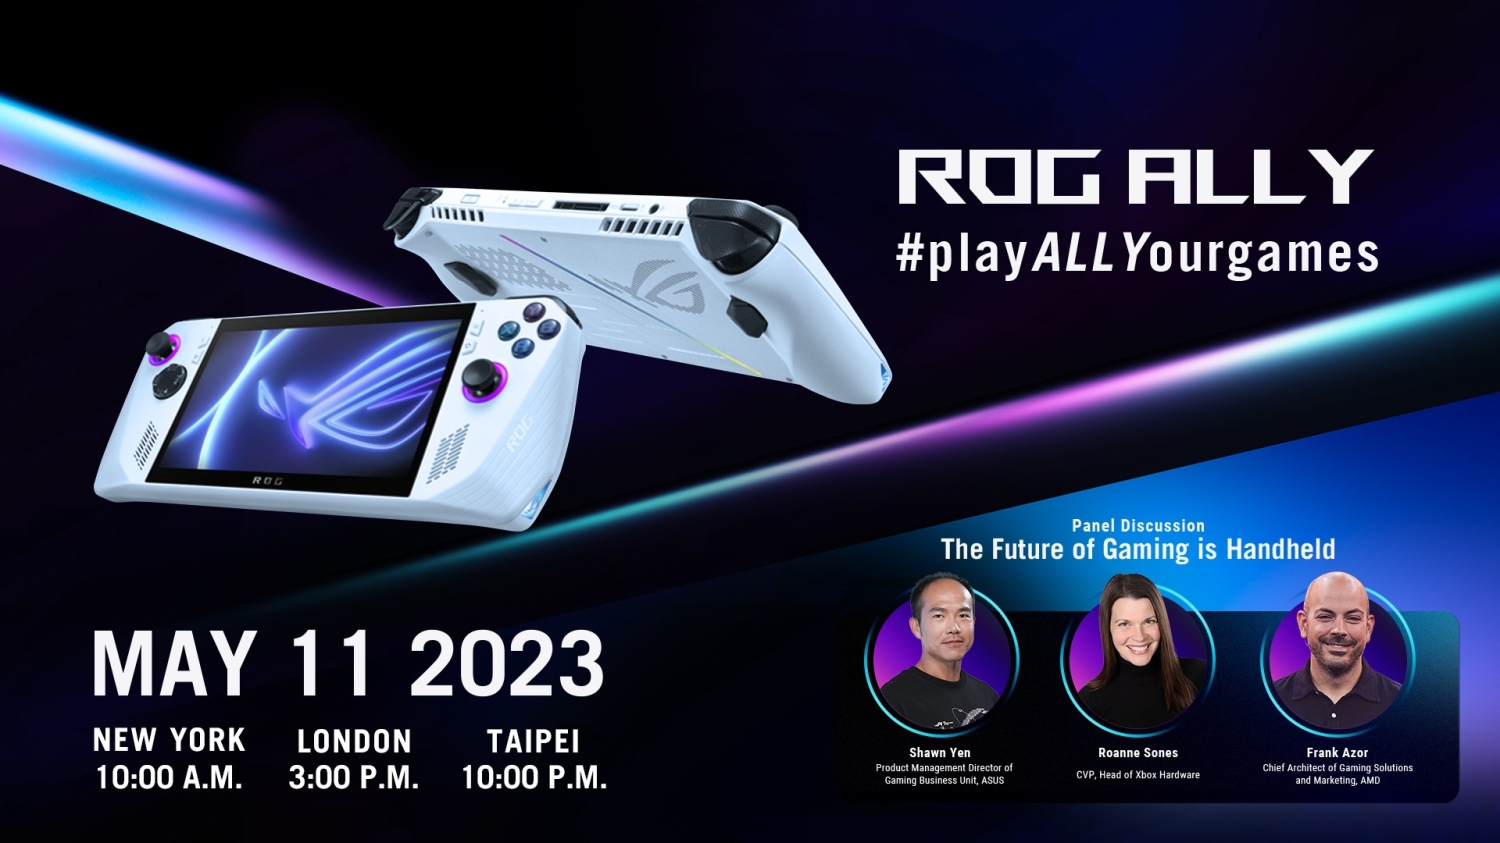 Promotional image advertising the May 11 2023 reveal event for the Asus ROG Ally.